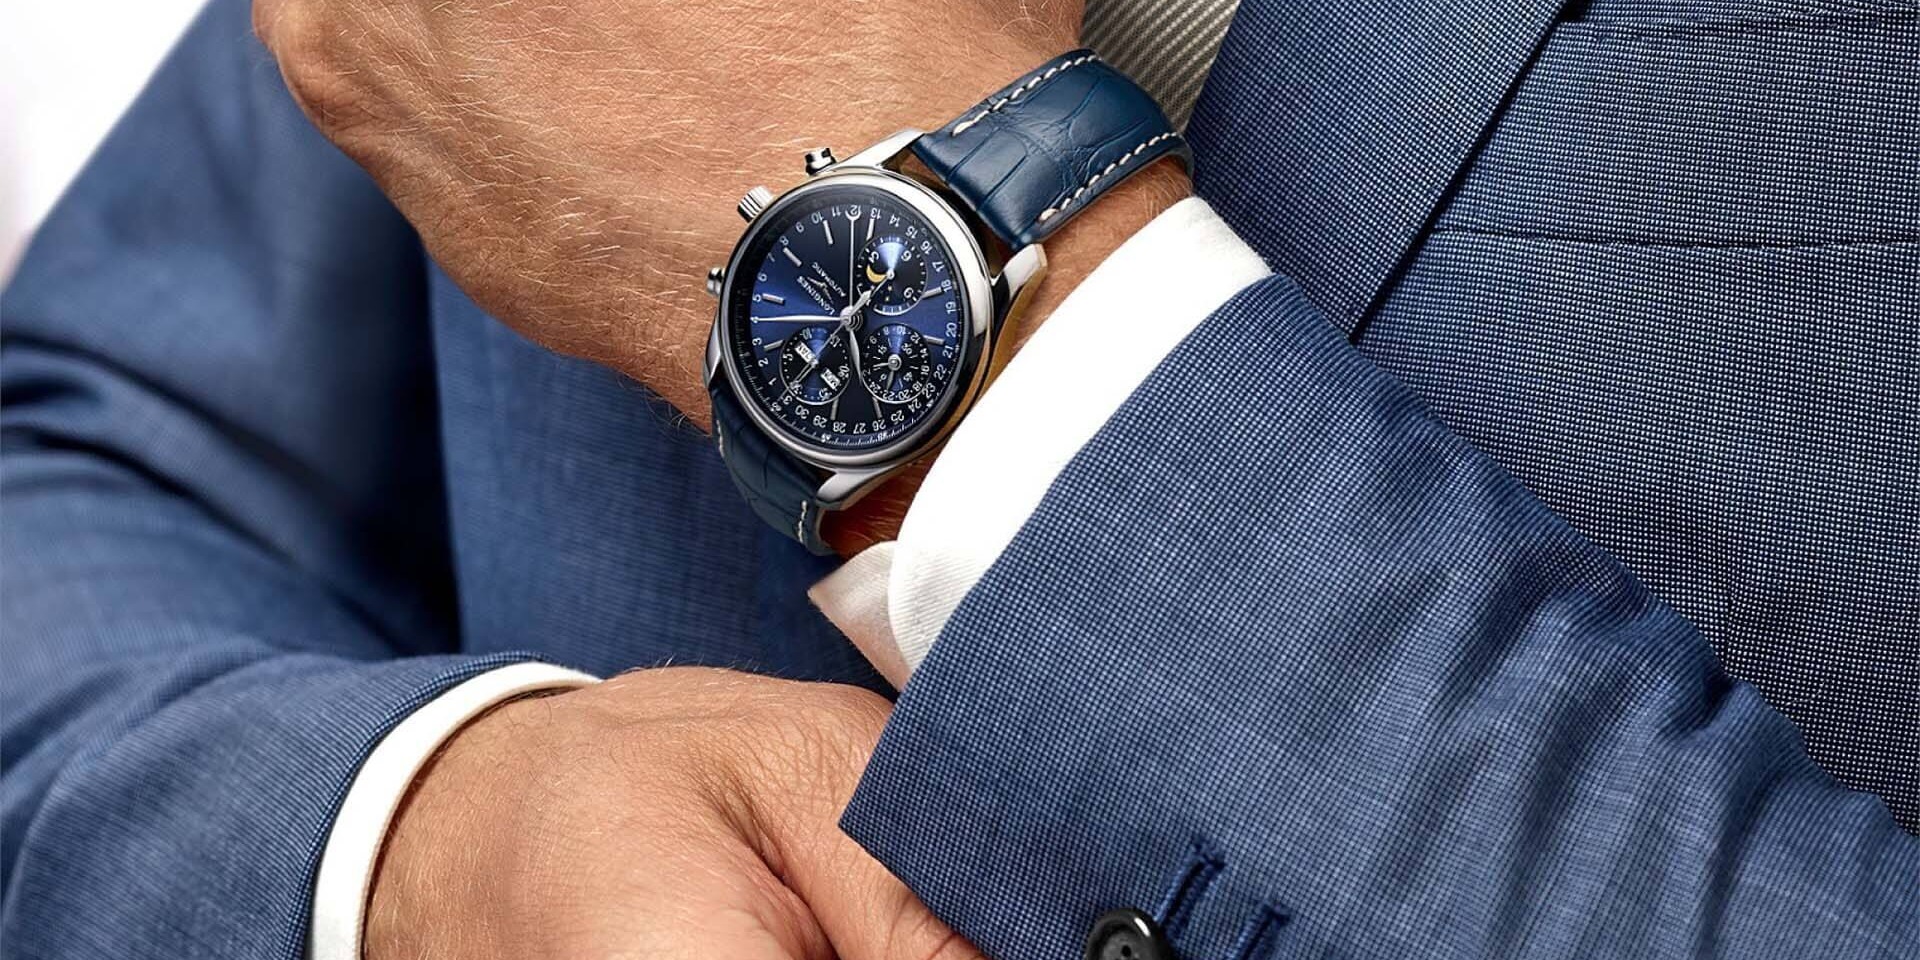 Blue Moon (Phases) – Three Blue Dial Astronomical Watches That We Love